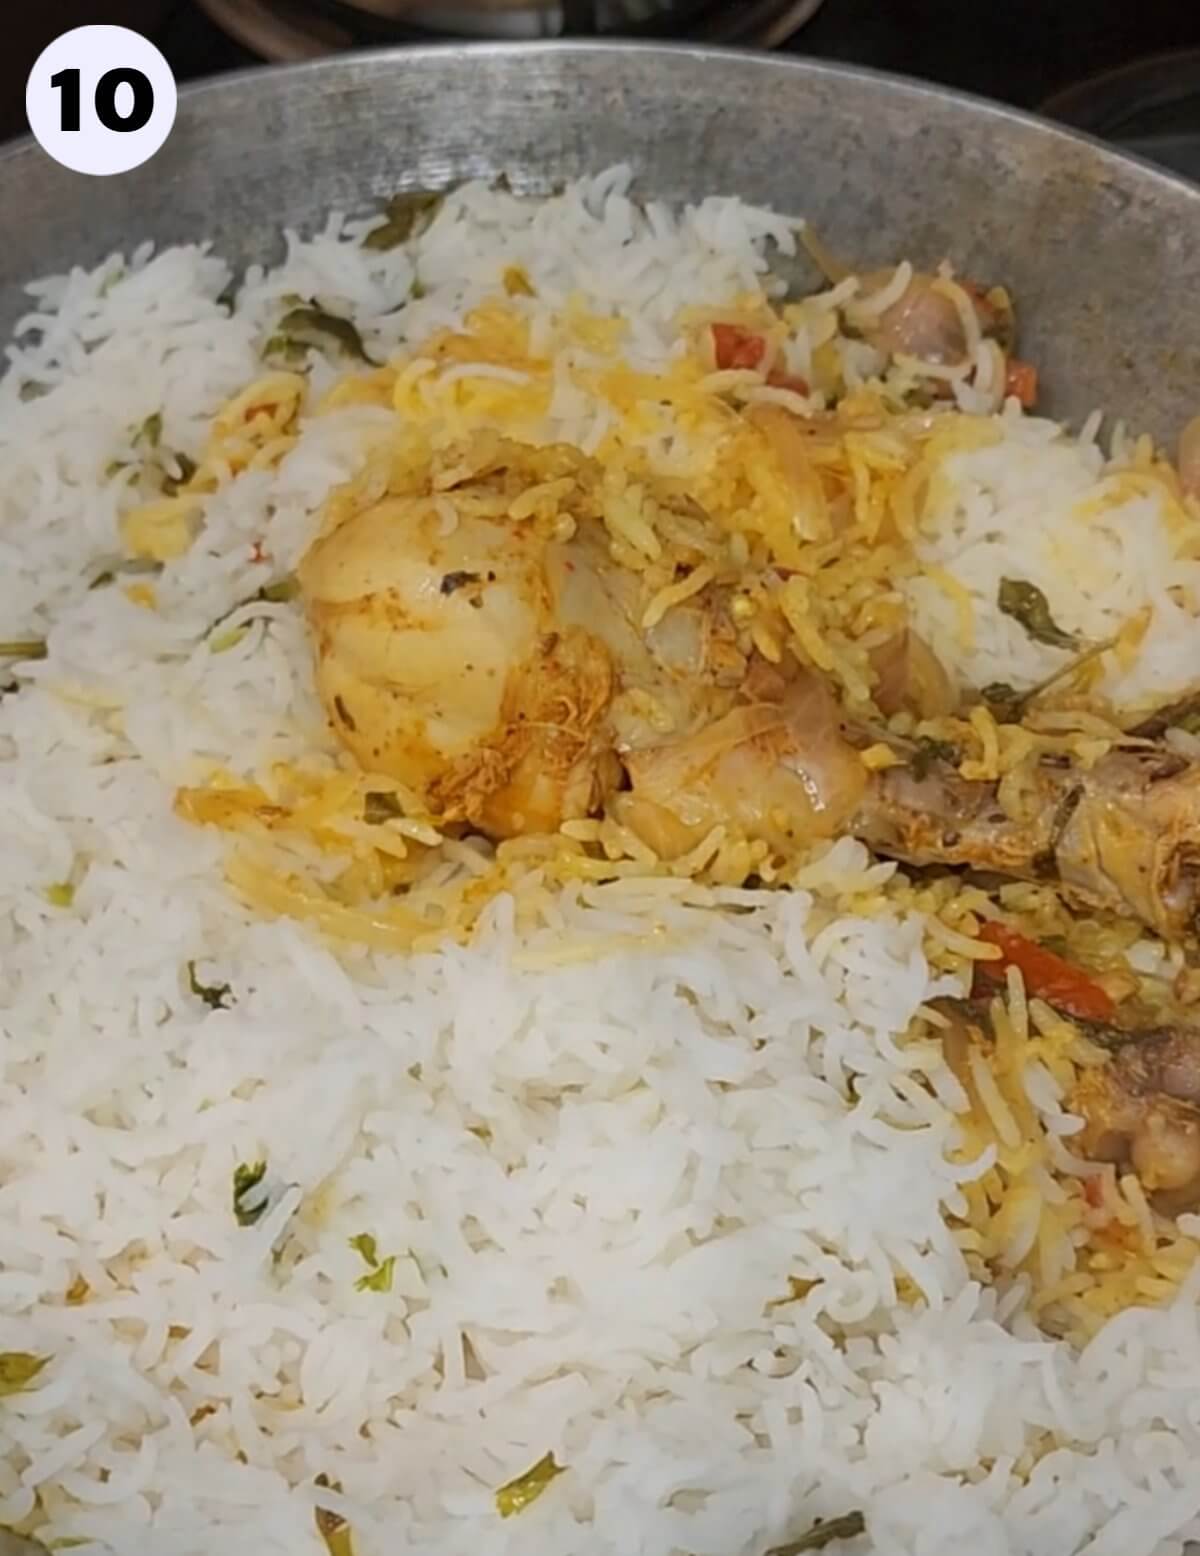 Cooked chicken drumstick place on top of cooked biryani.